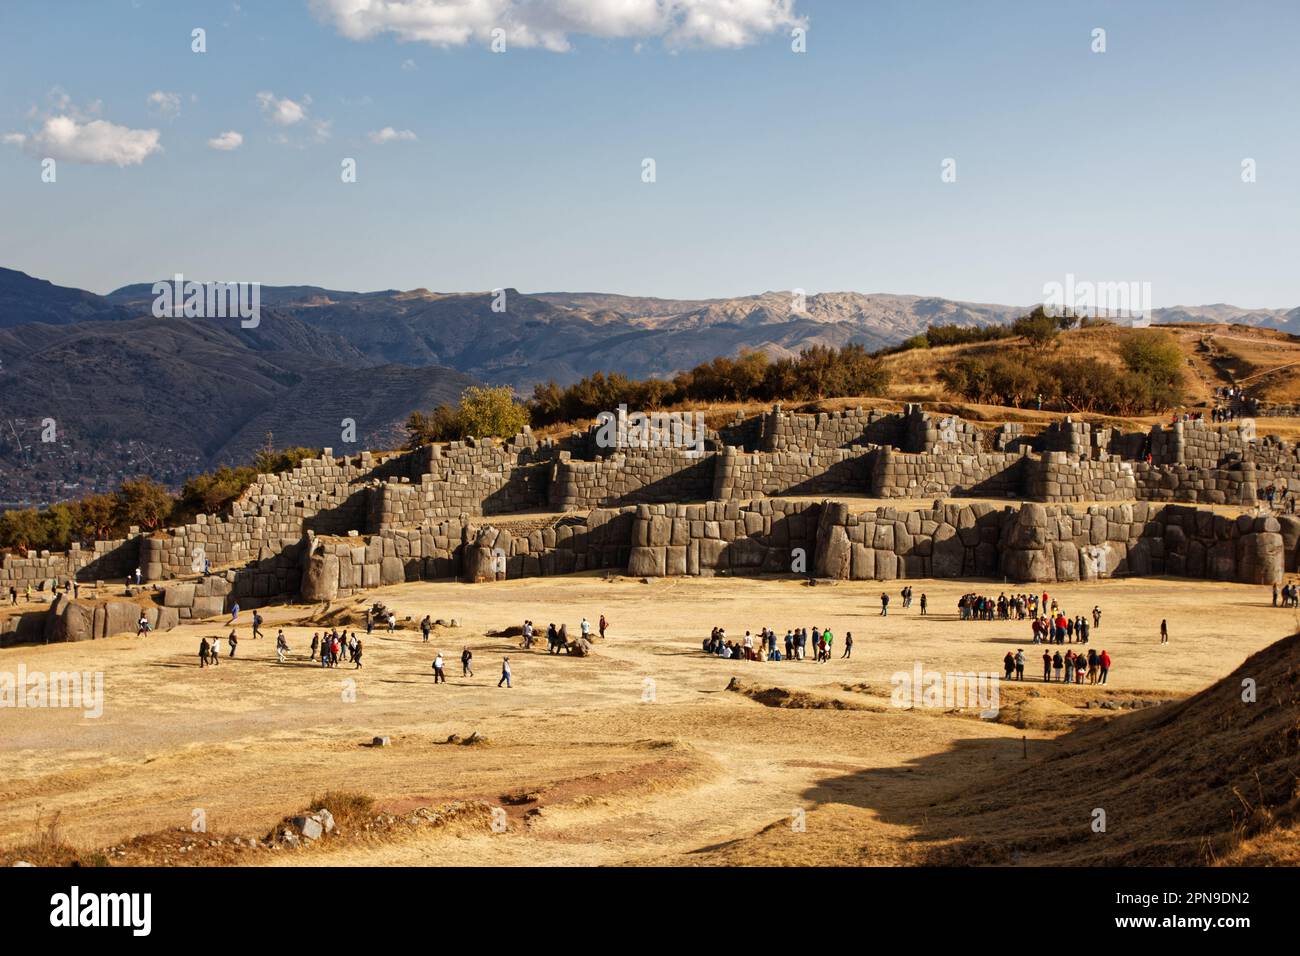 The dry walls of Saqsaywaman (AKA Sacsayhuamán or Xacxaguaman), a citadel built by the Incas in the 15th century, on the northern outskirts of Cusco Stock Photo